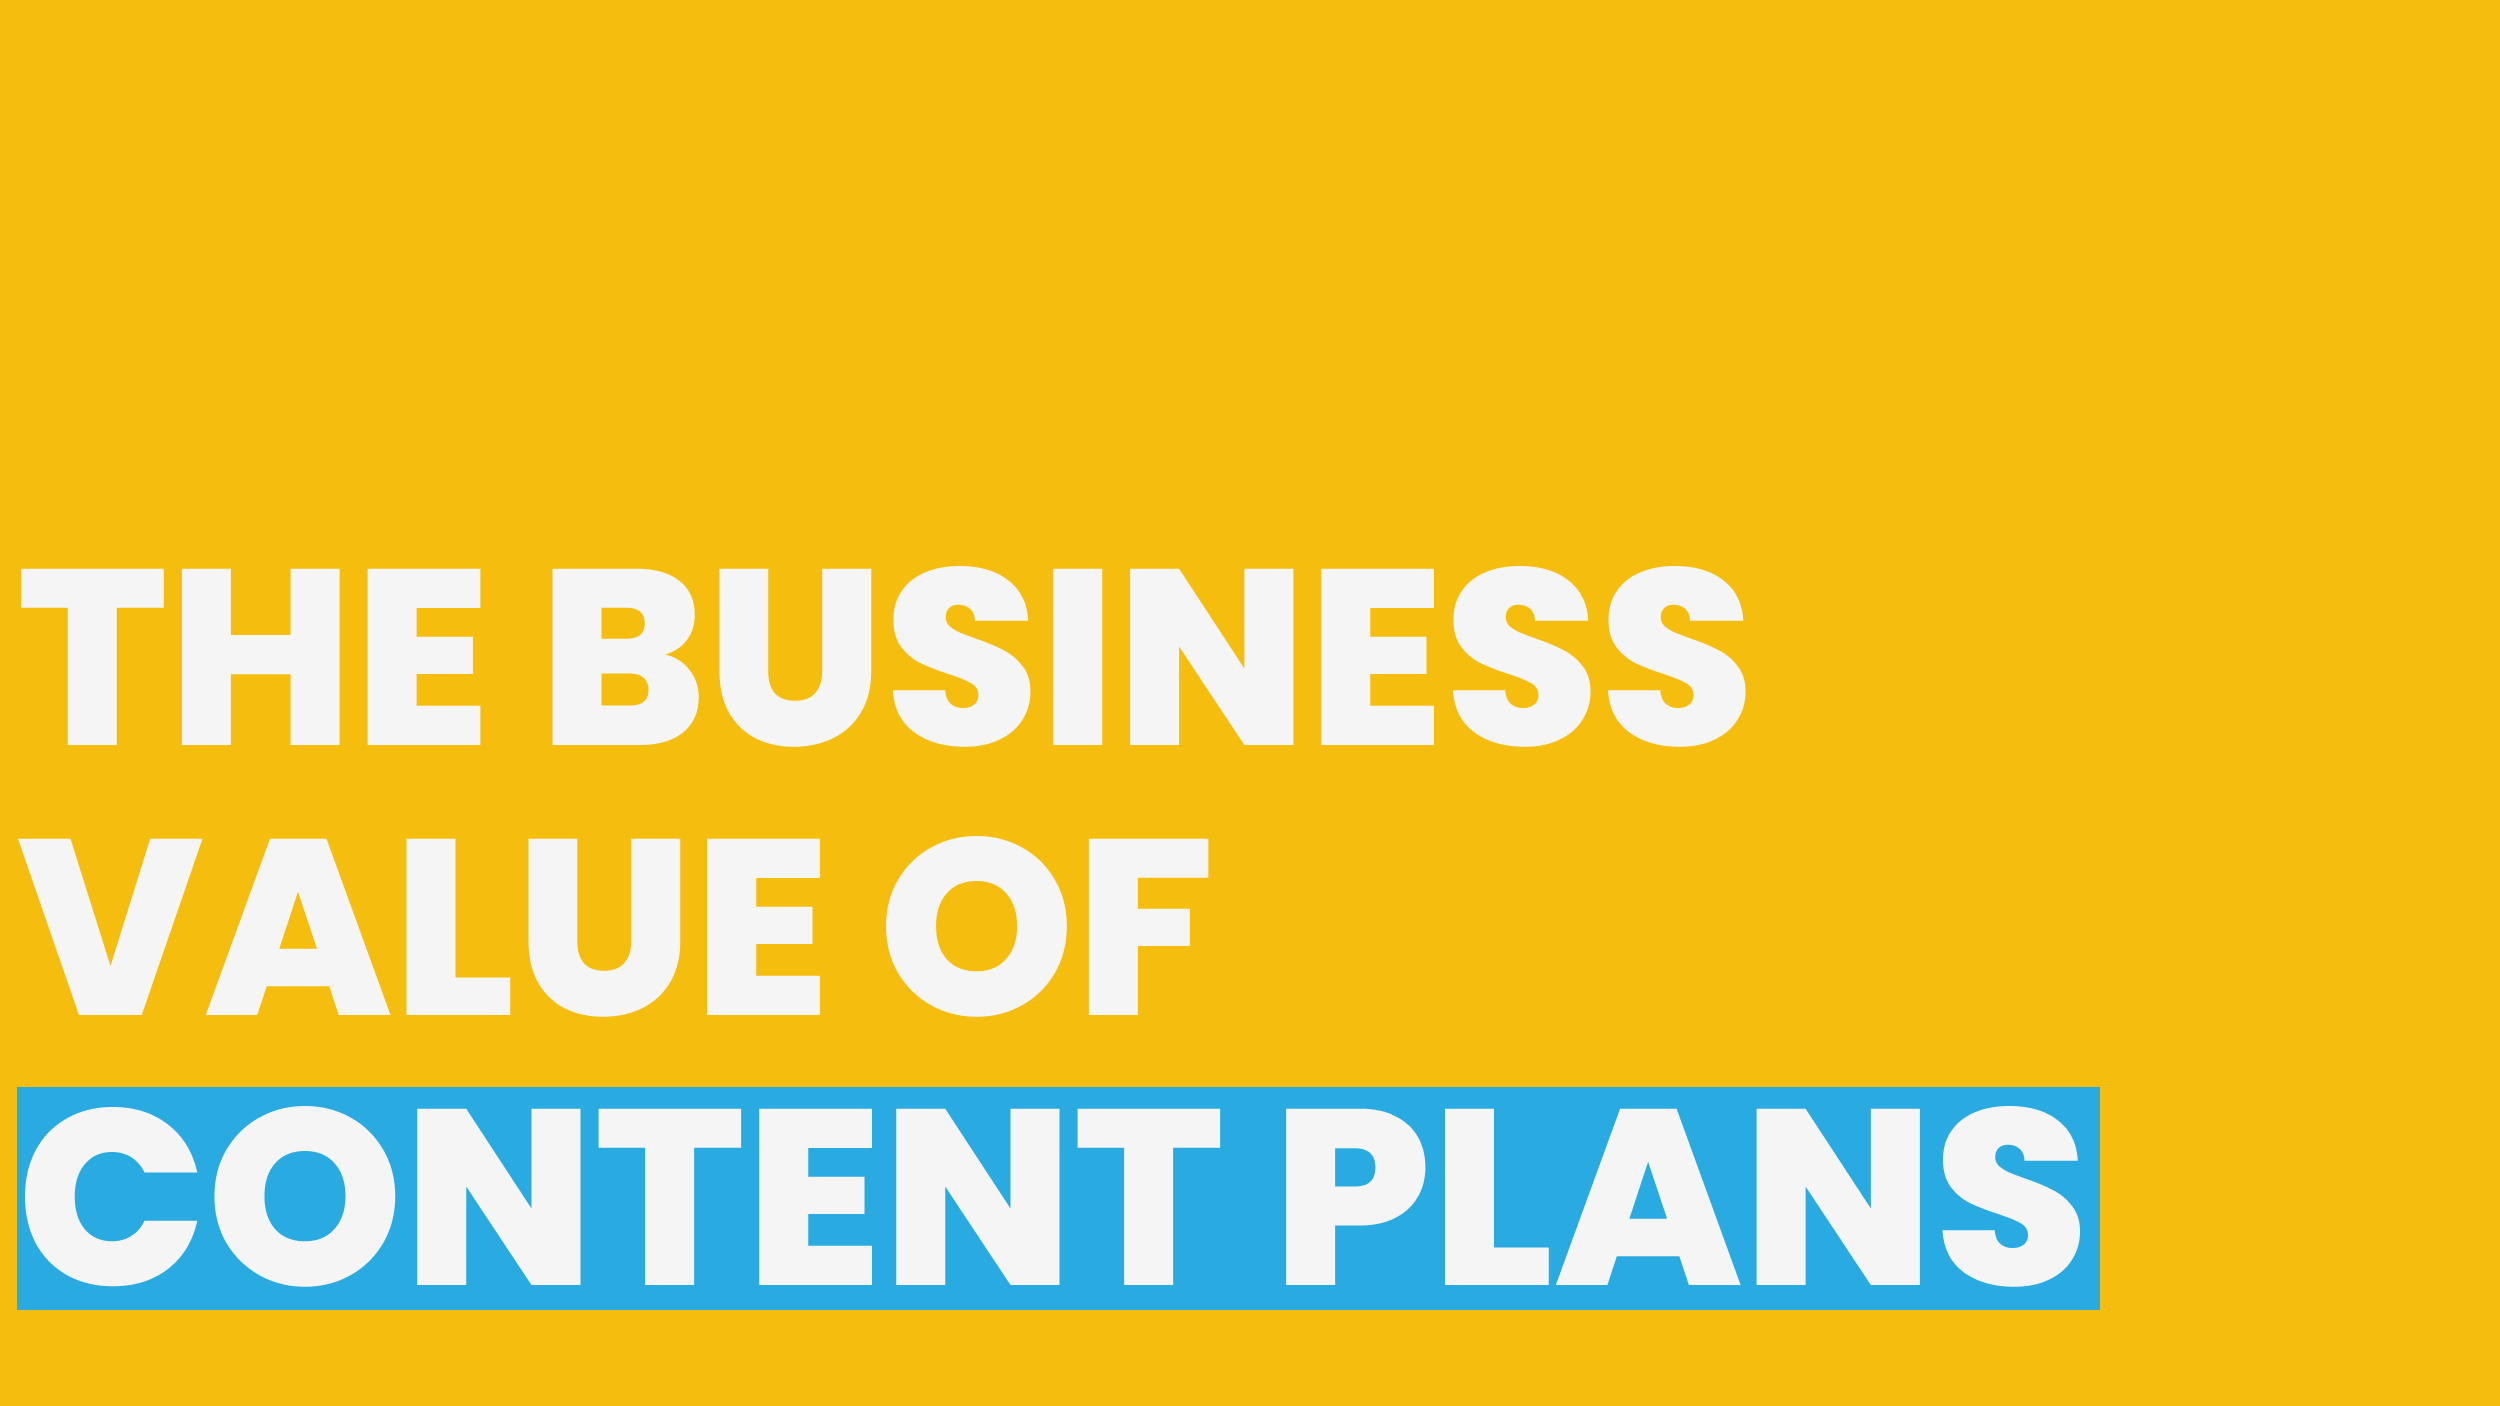 THE BUSINESS VALUE OF CONTENT PLANS